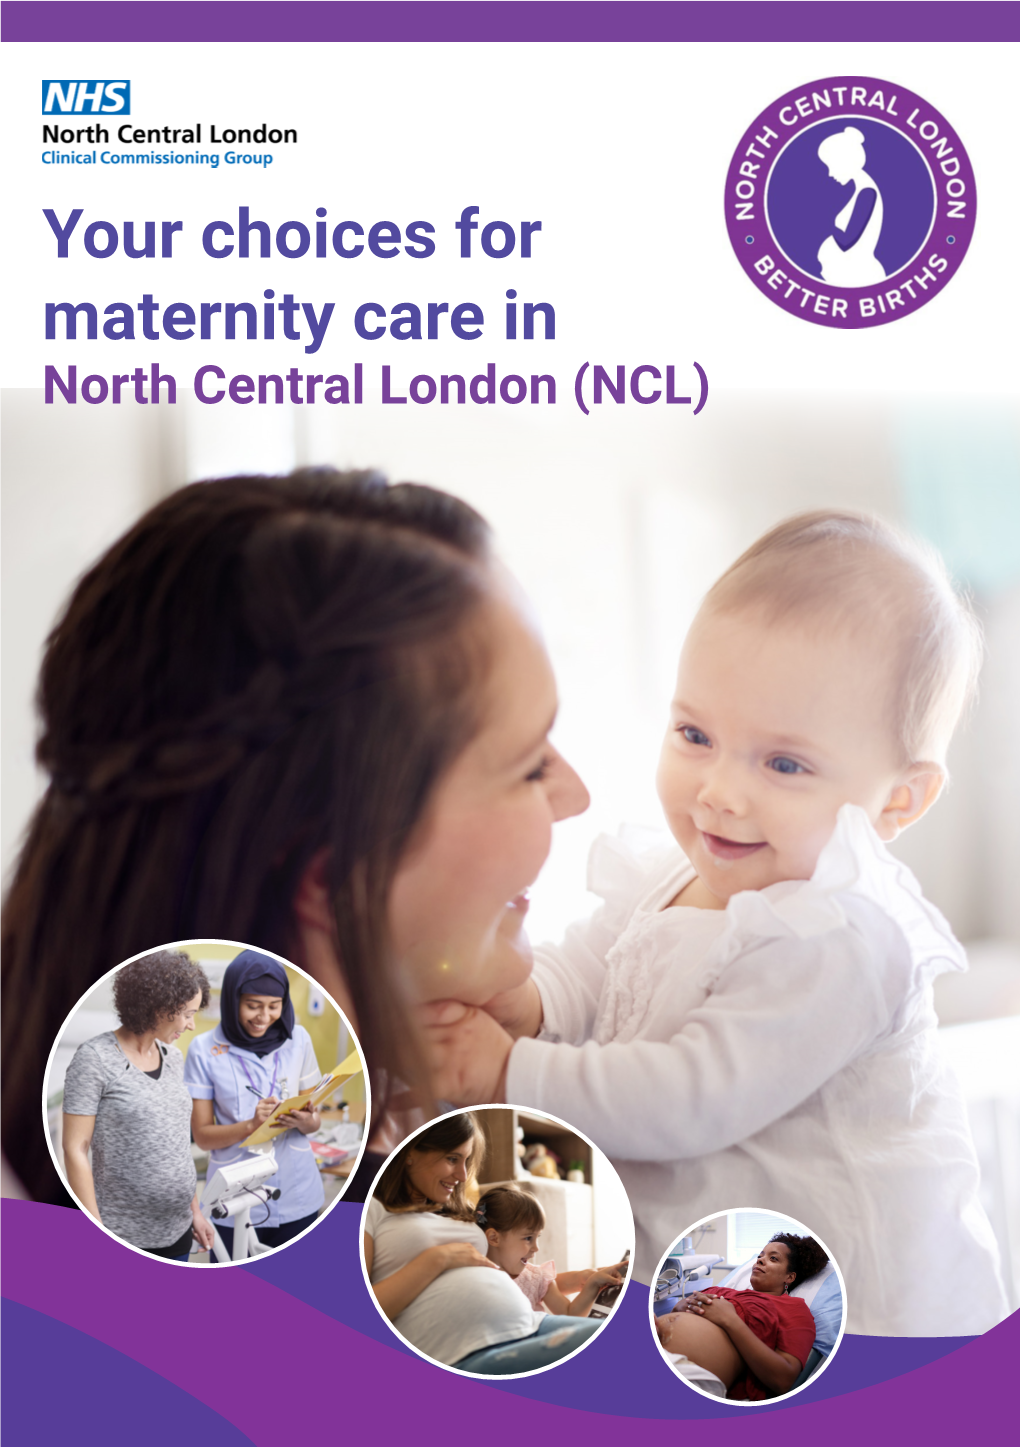 Your Choices for Maternity Care in North Central London (NCL) Introduction – Improving Your Choice